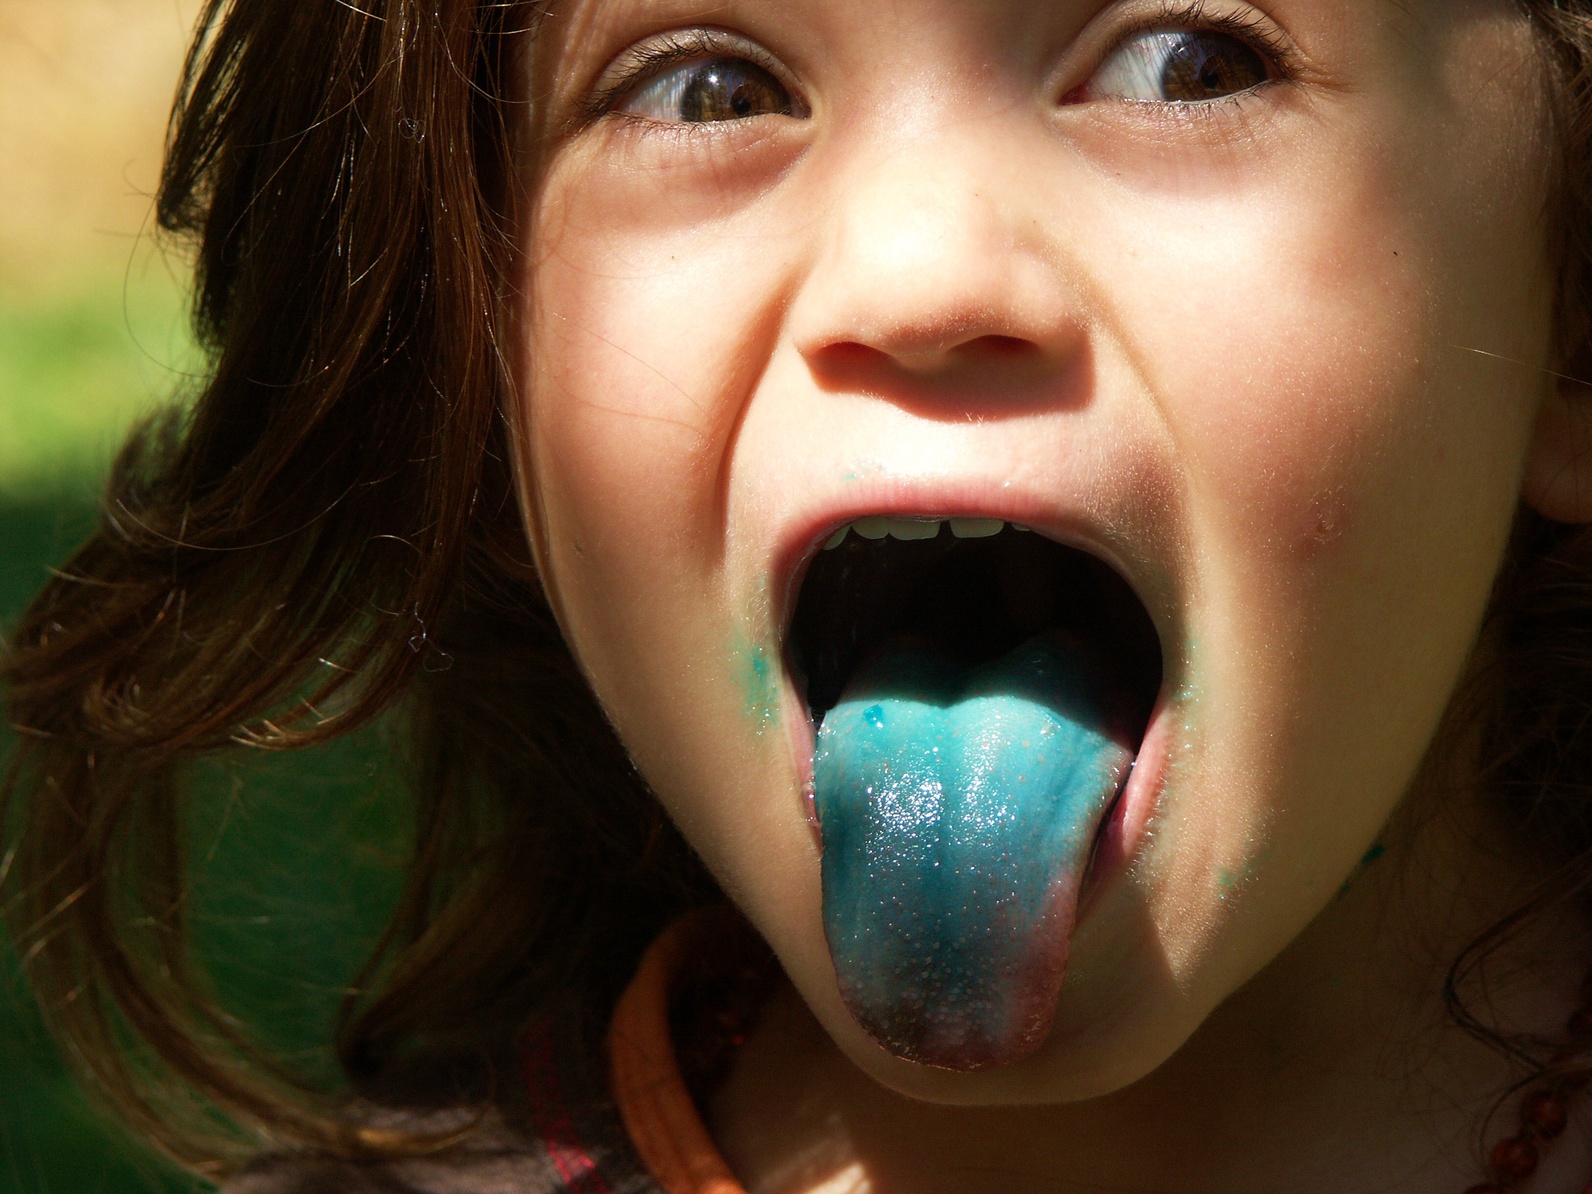 My Cultural Shock Over Food Coloring in America